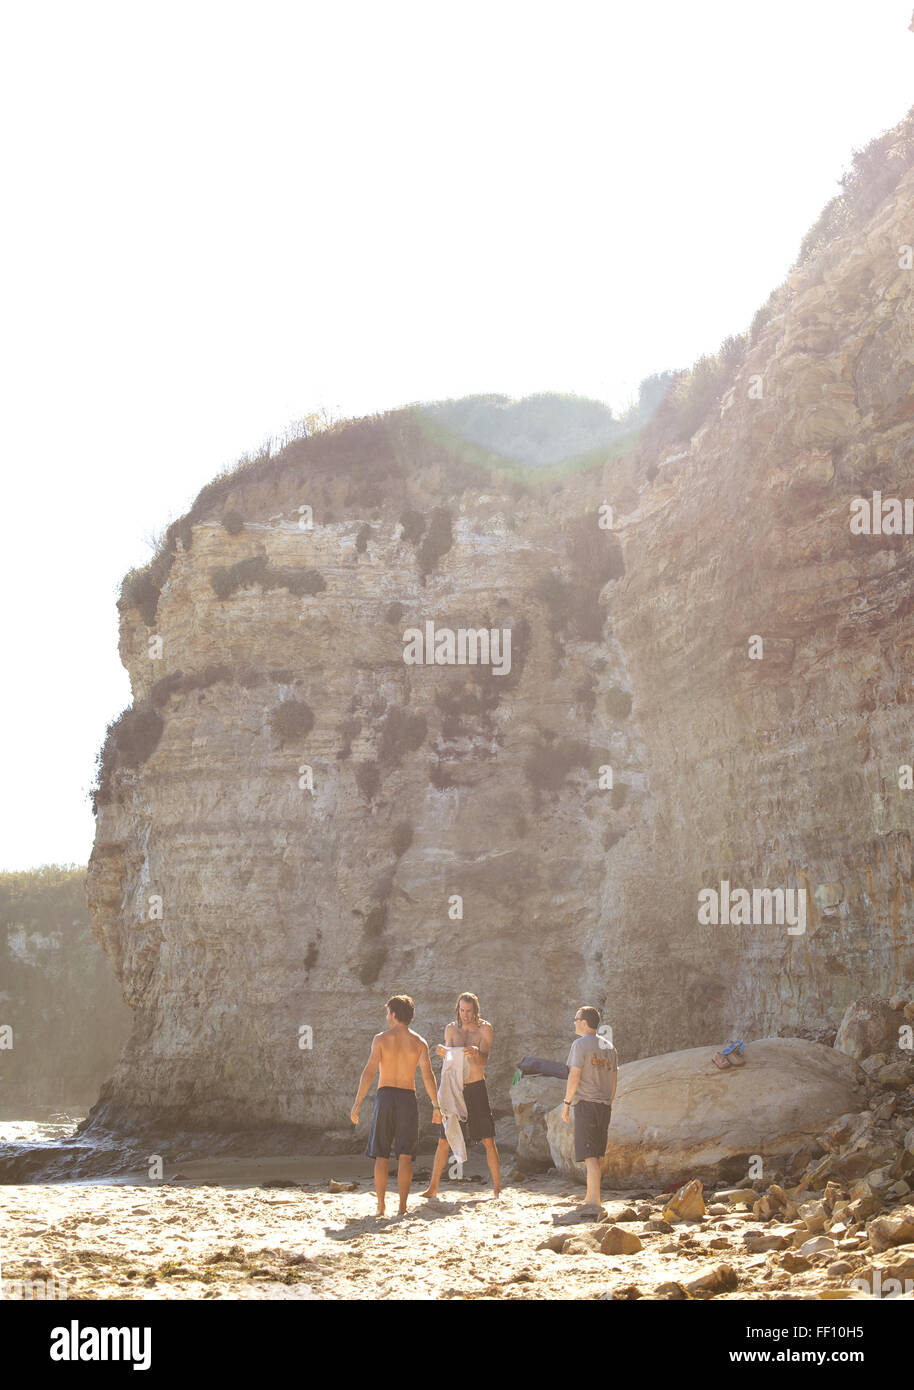 Three men standing on a sunny beach with the cliff face in the background, one man puts on his shirt. Stock Photo